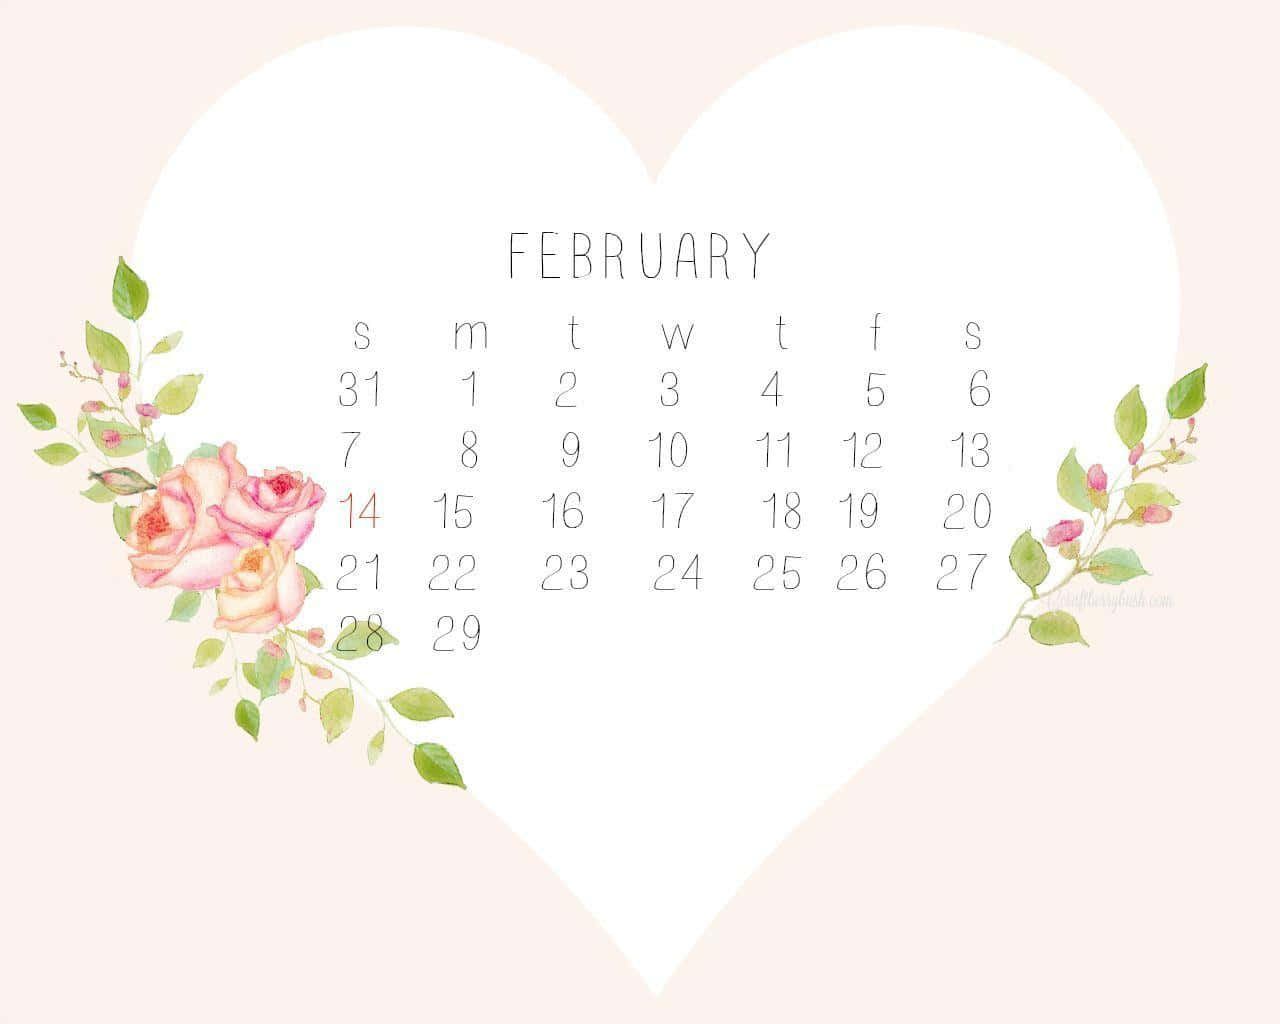 “Welcome Spring with this blissful February background”